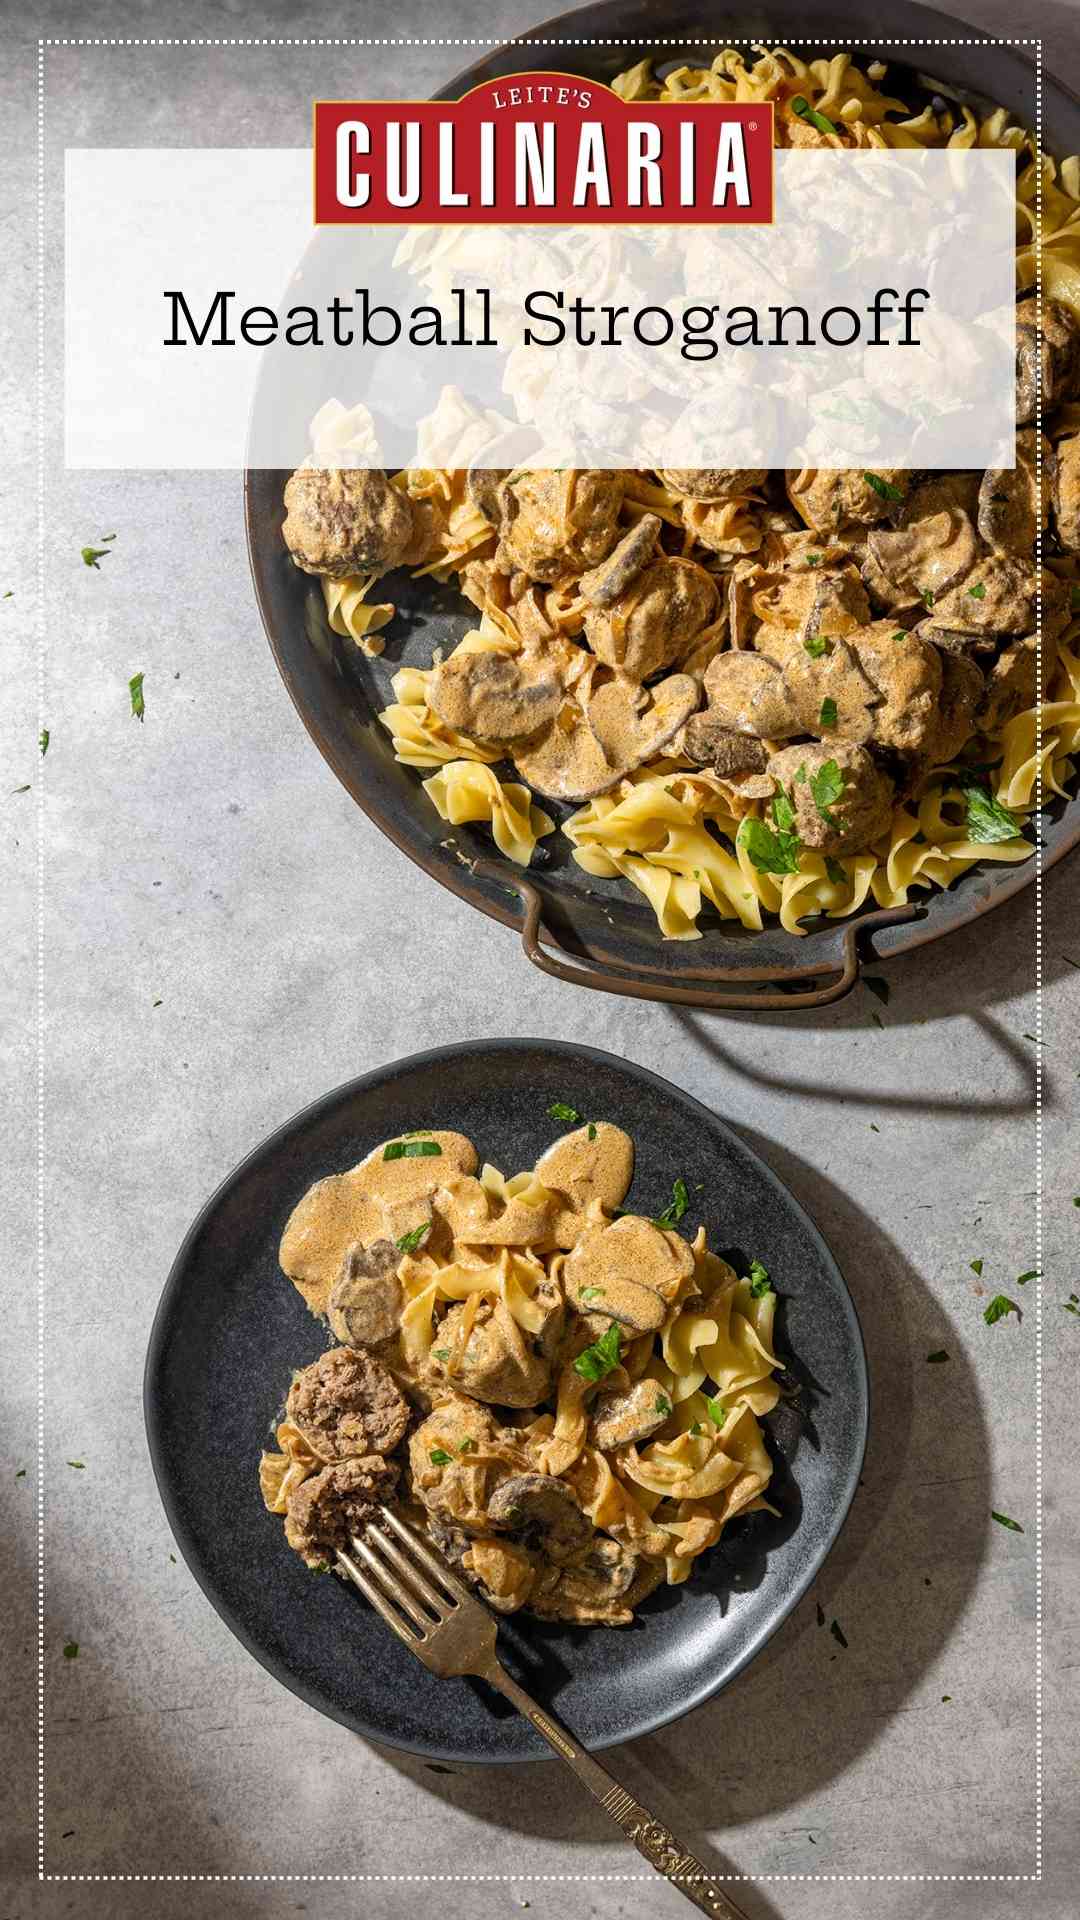 A platter of meatball Stroganoff over buttered noodles next to a black plate filled with the same.